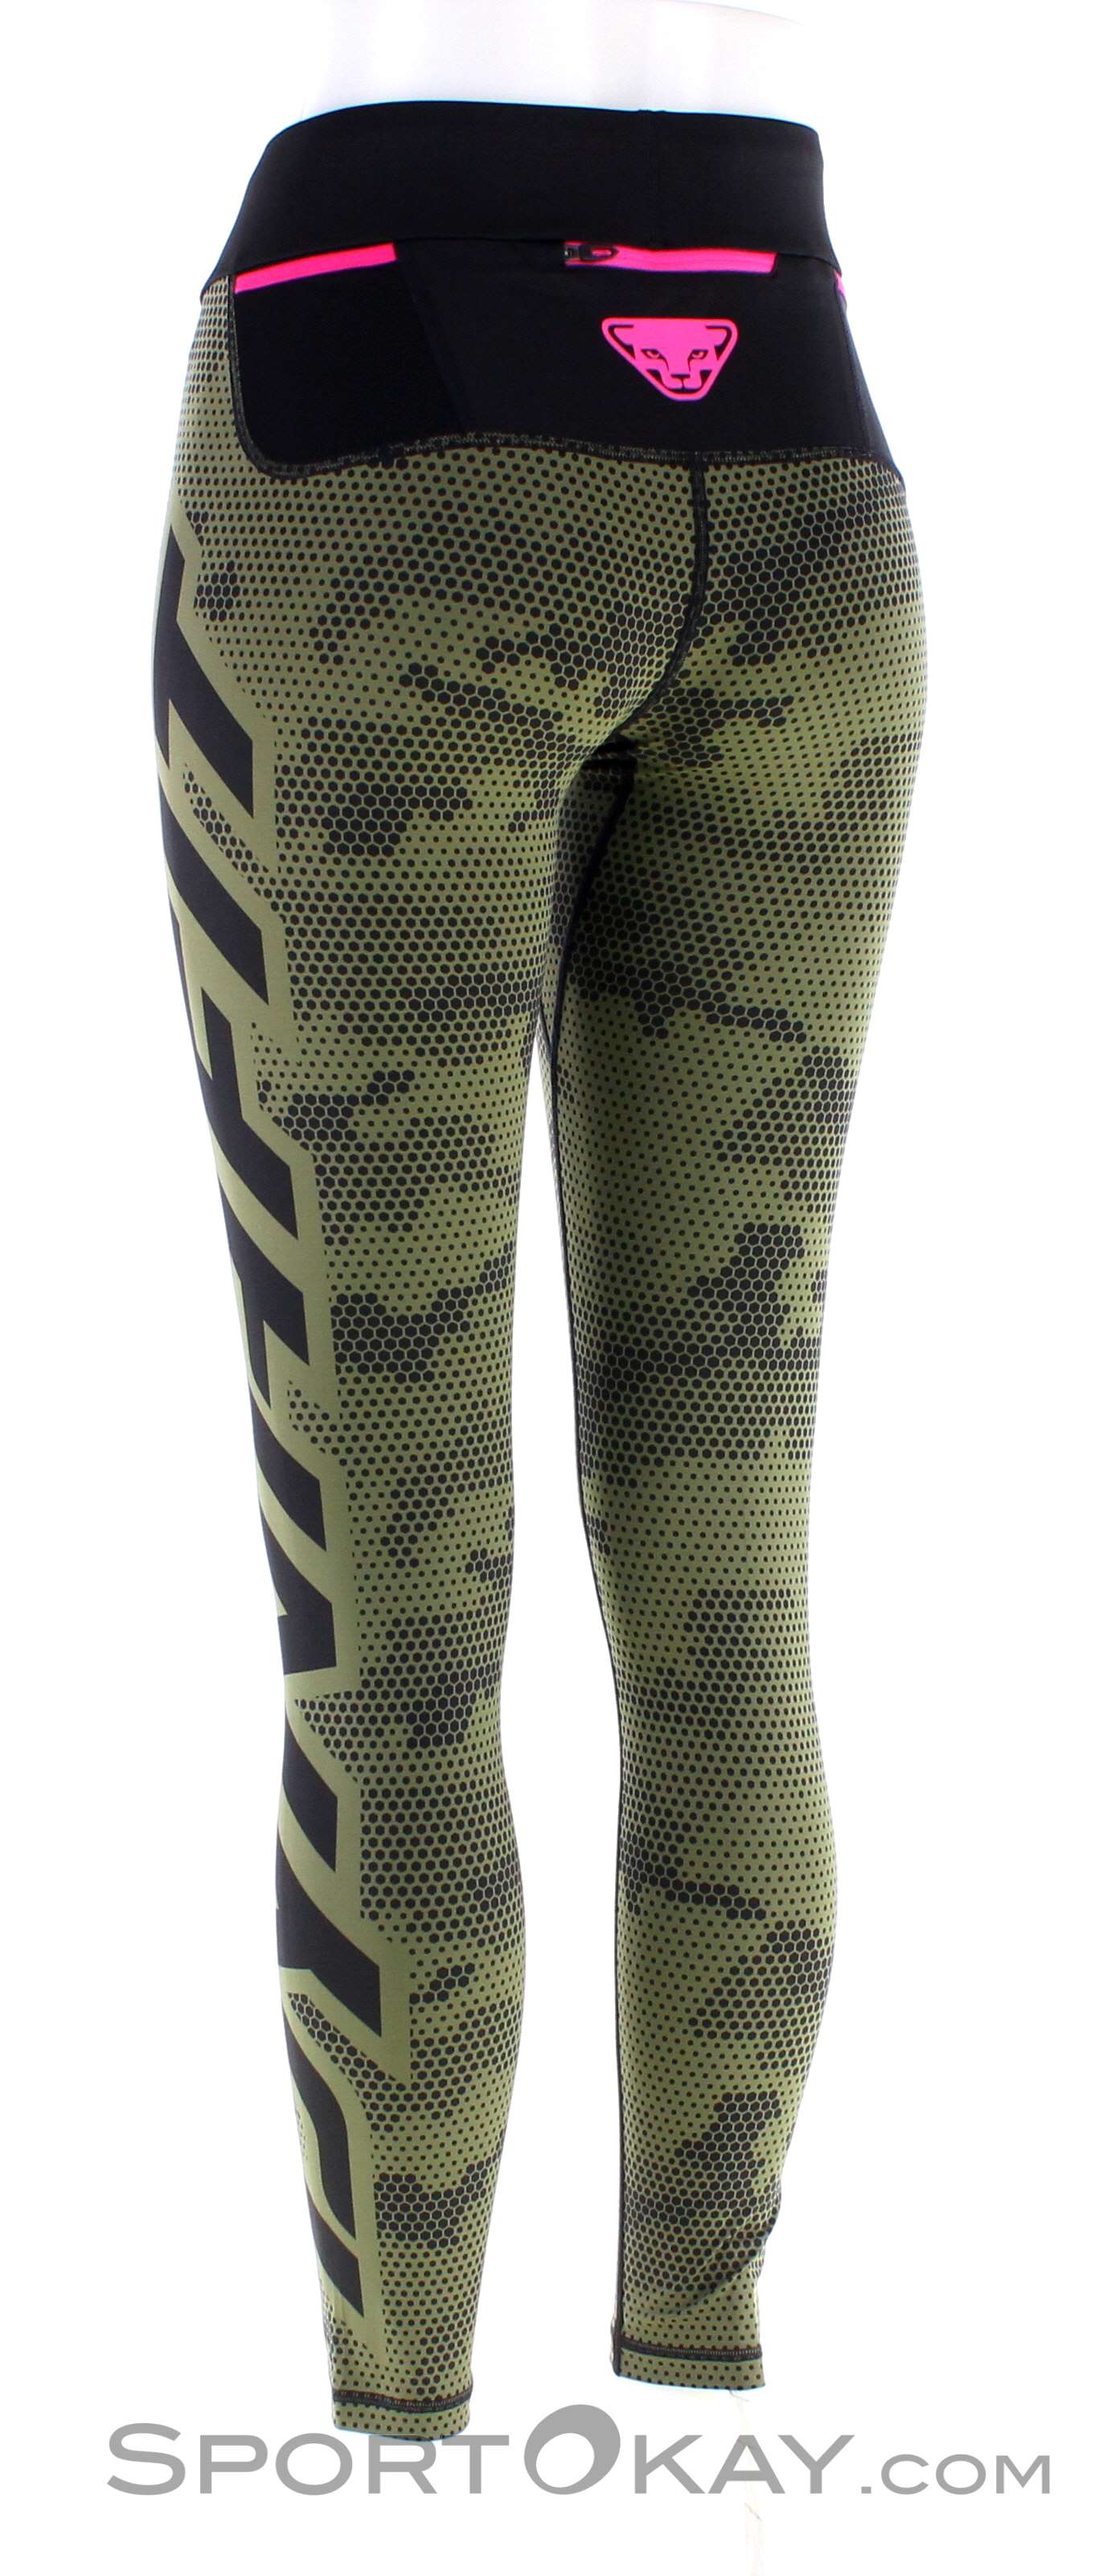 Dynafit Trail Graphic Tights Women Running Pants - Pants - Fitness Clothing  - Fitness - All